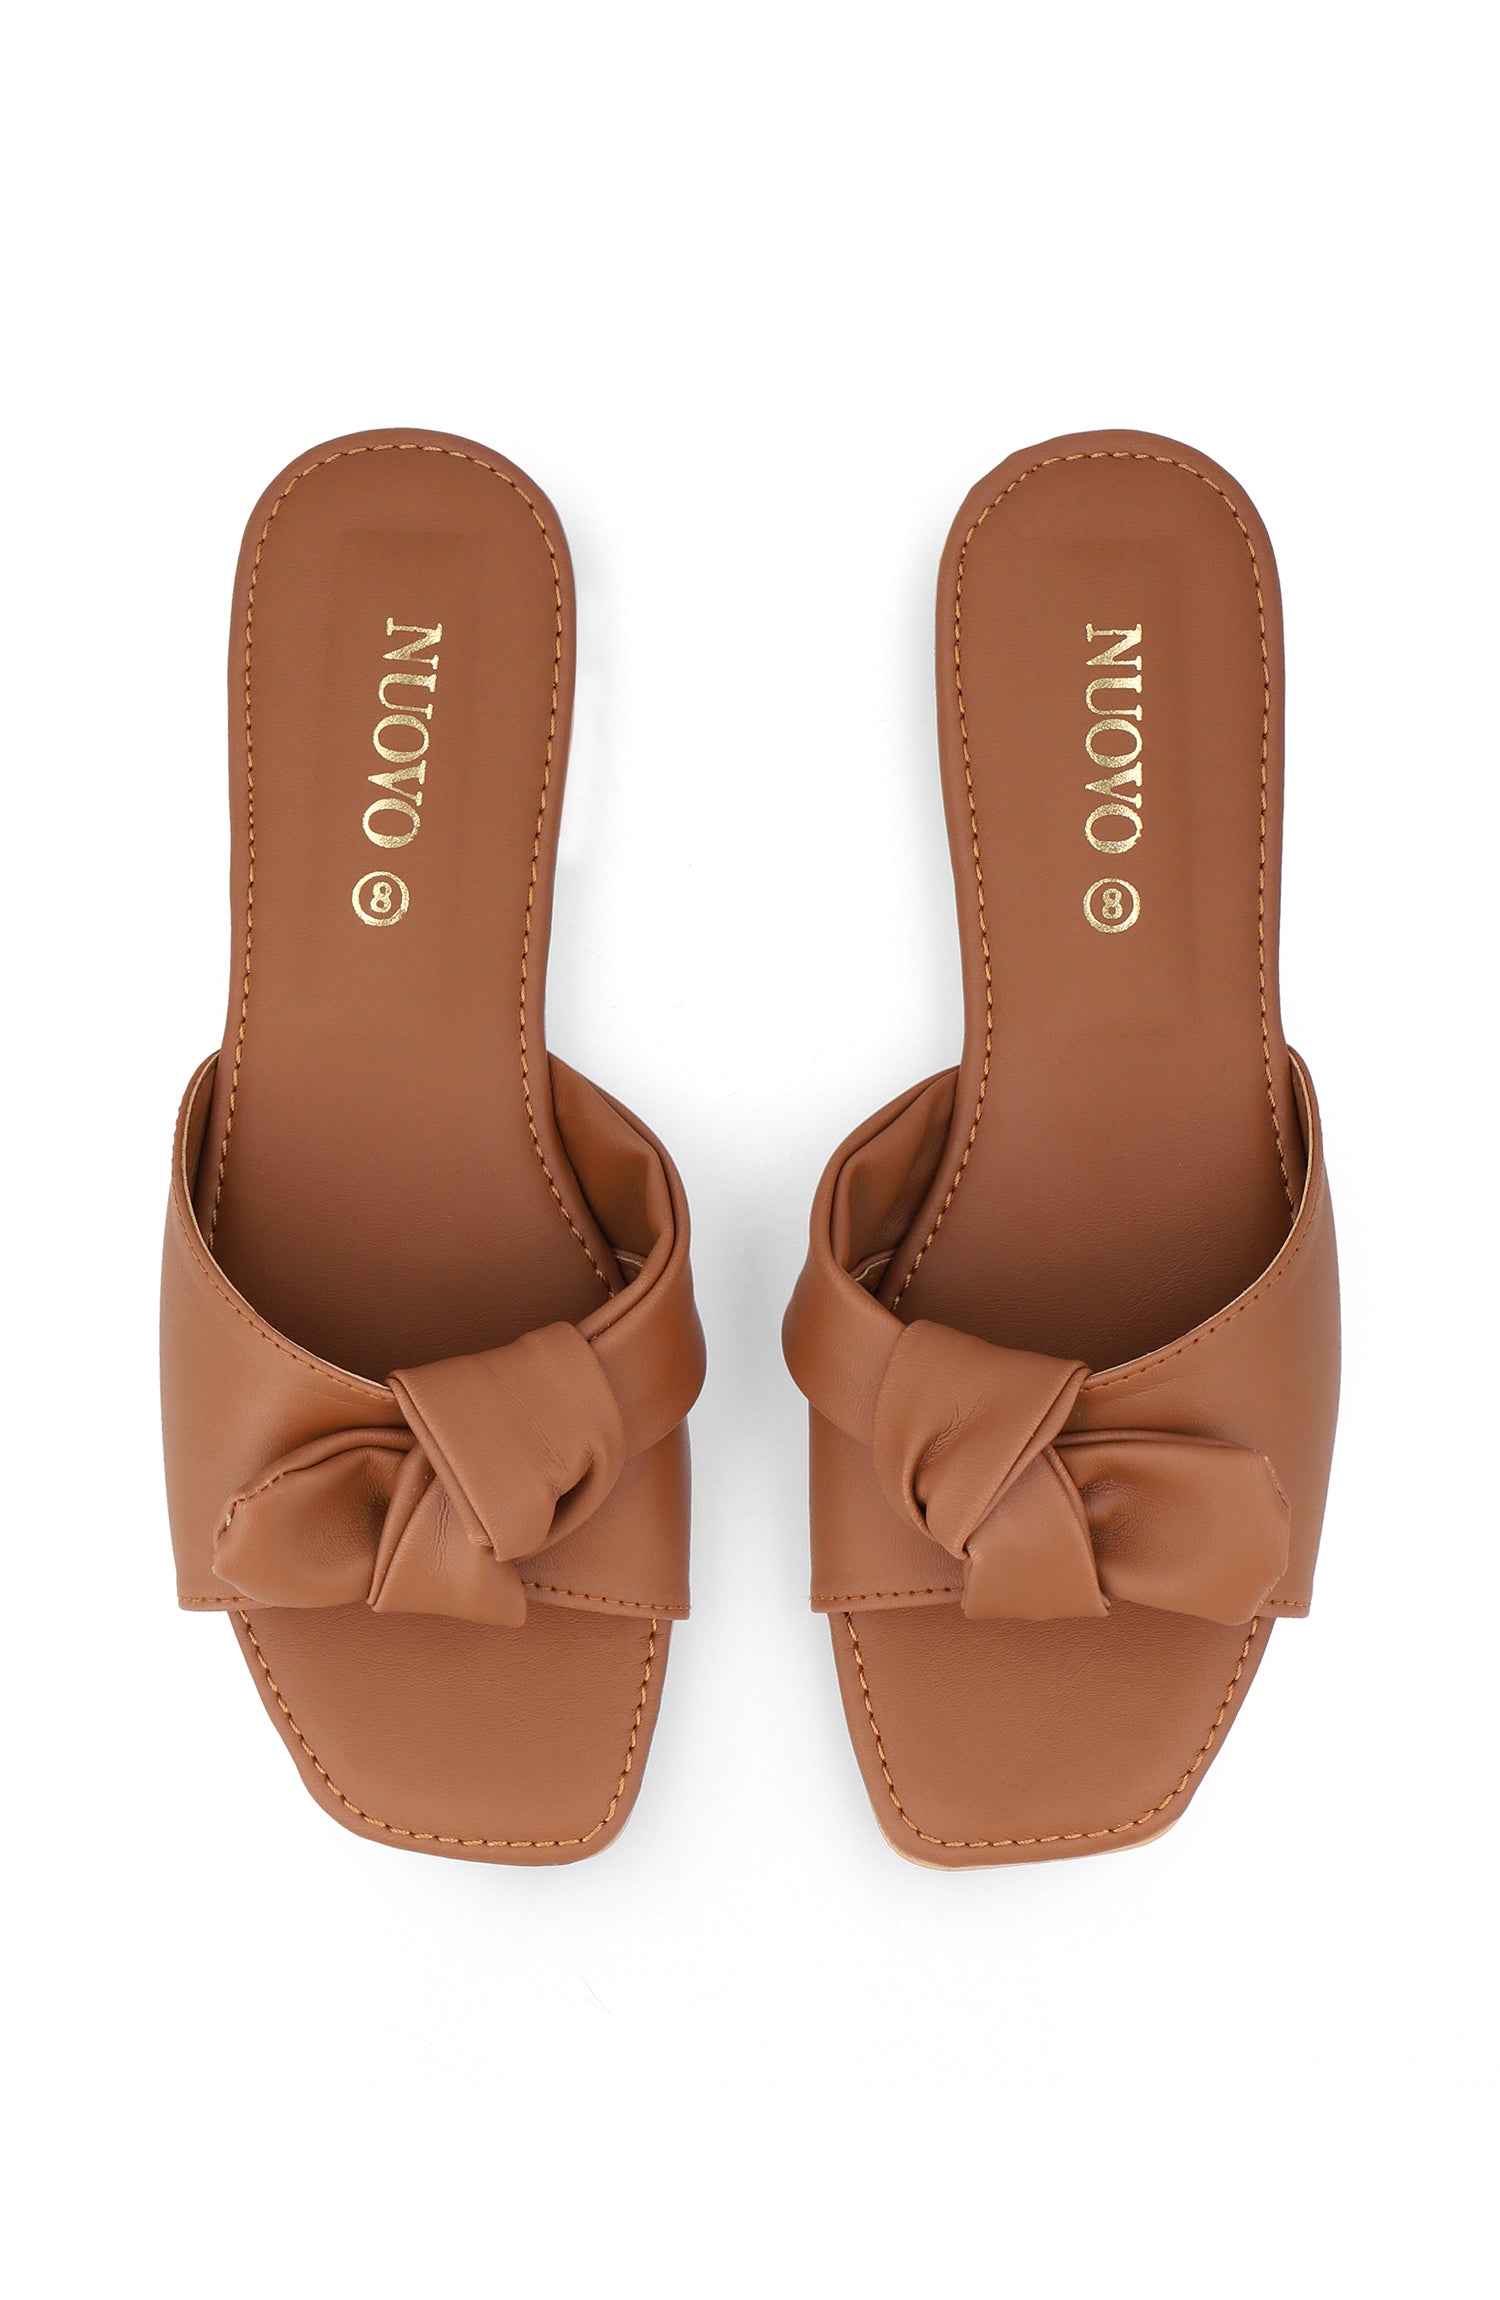 Women Slippers -  BROWN (ORFS-79 BROWN)